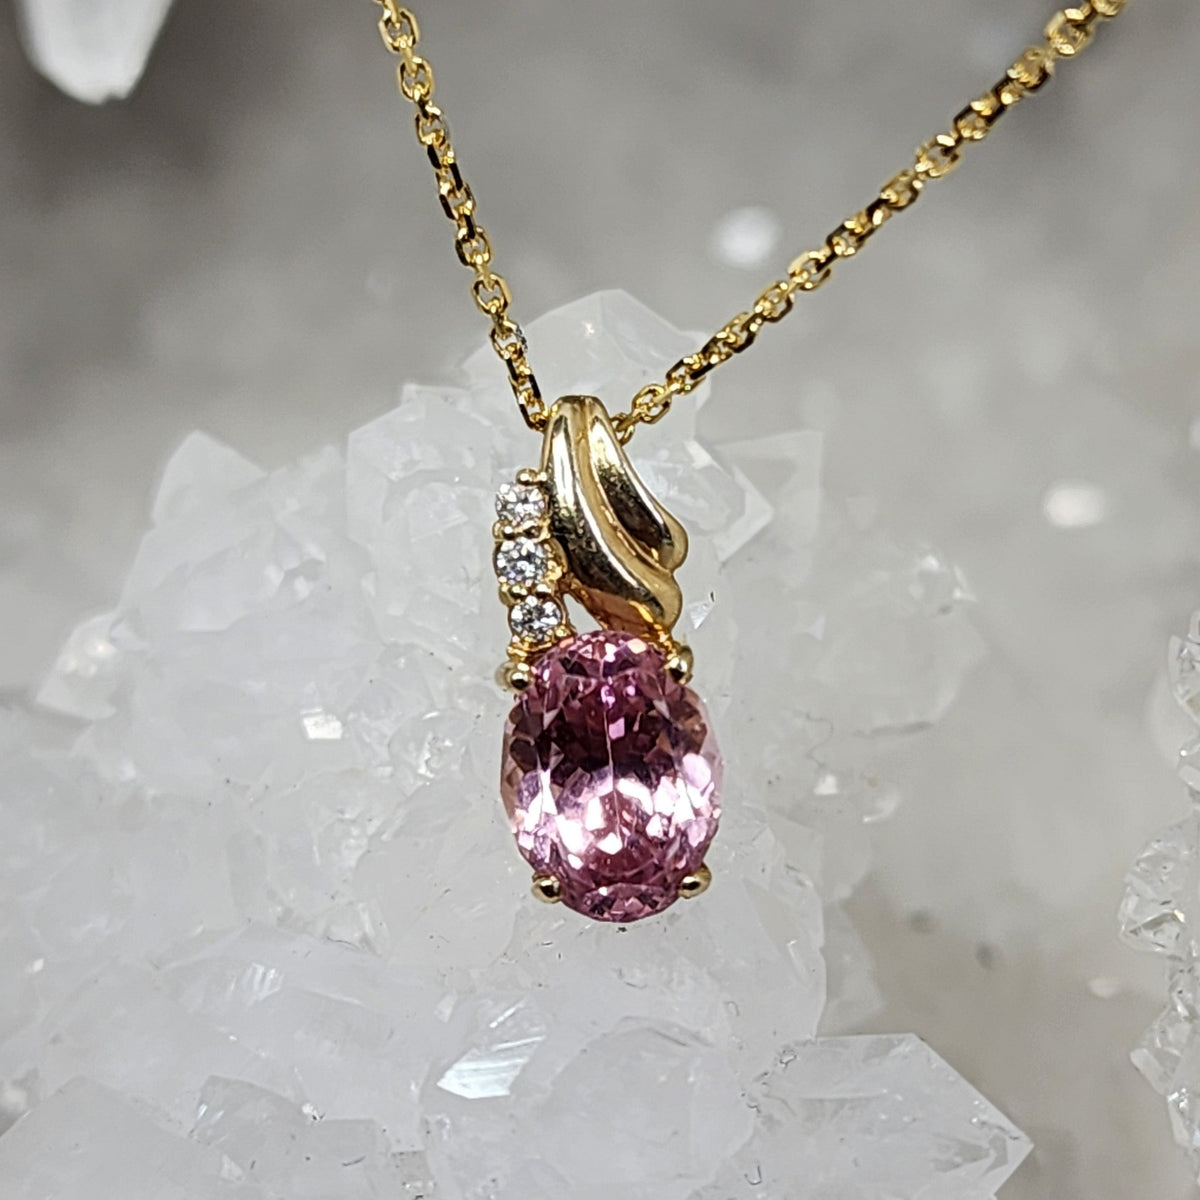 Pendant - 14K Gold Pink Tourmaline Pendant with 3 Natural Accent